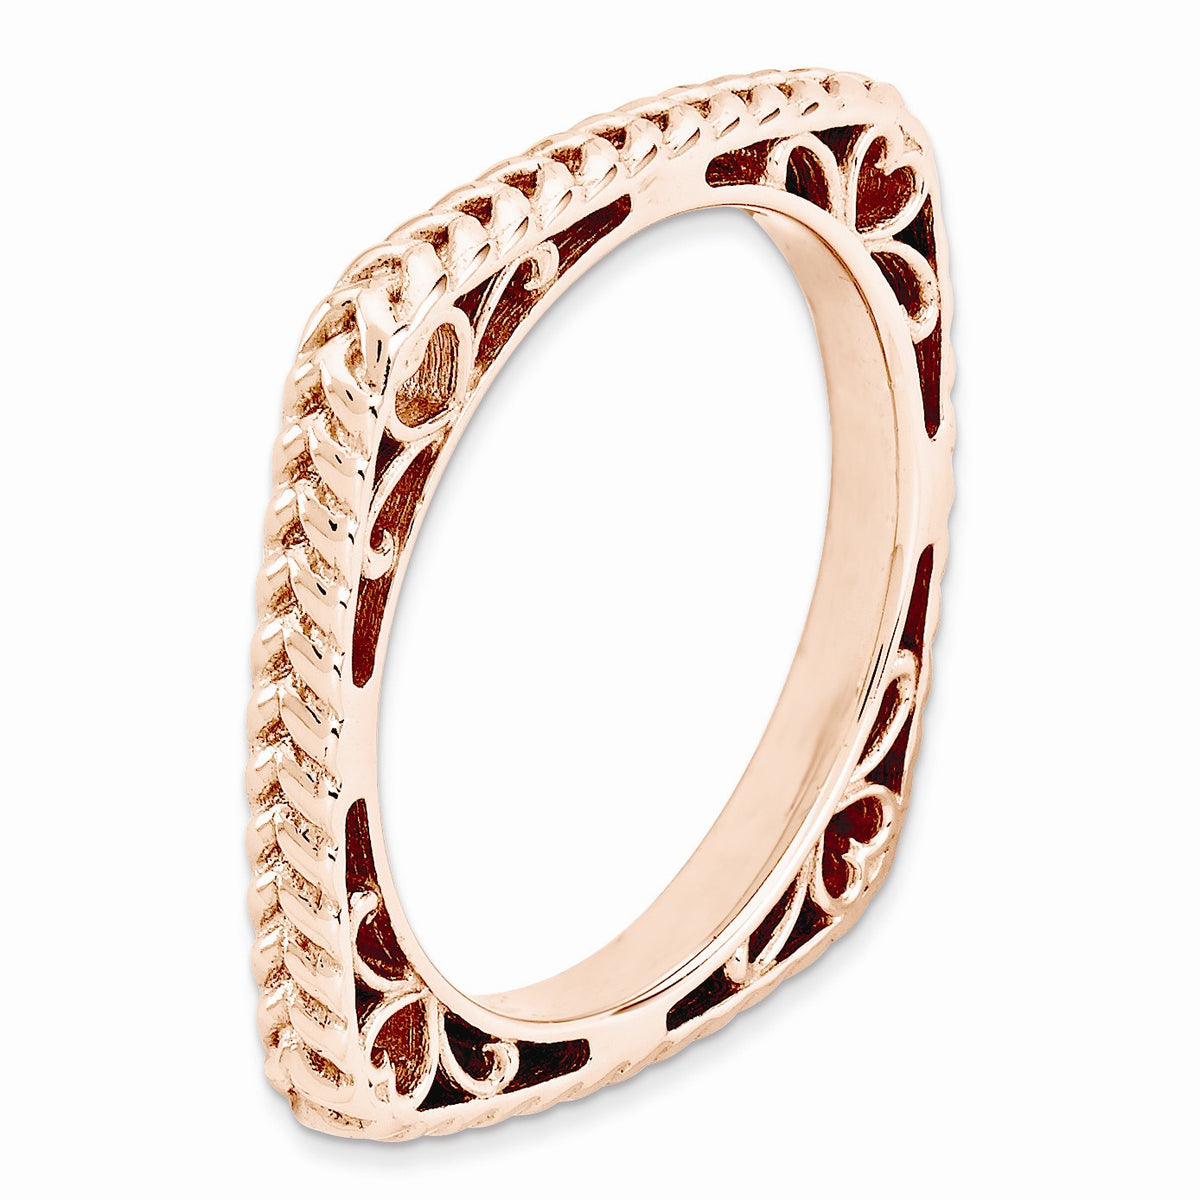 Alternate view of the Stackable 14K Rose Gold Plated Silver Square Wheat Band by The Black Bow Jewelry Co.